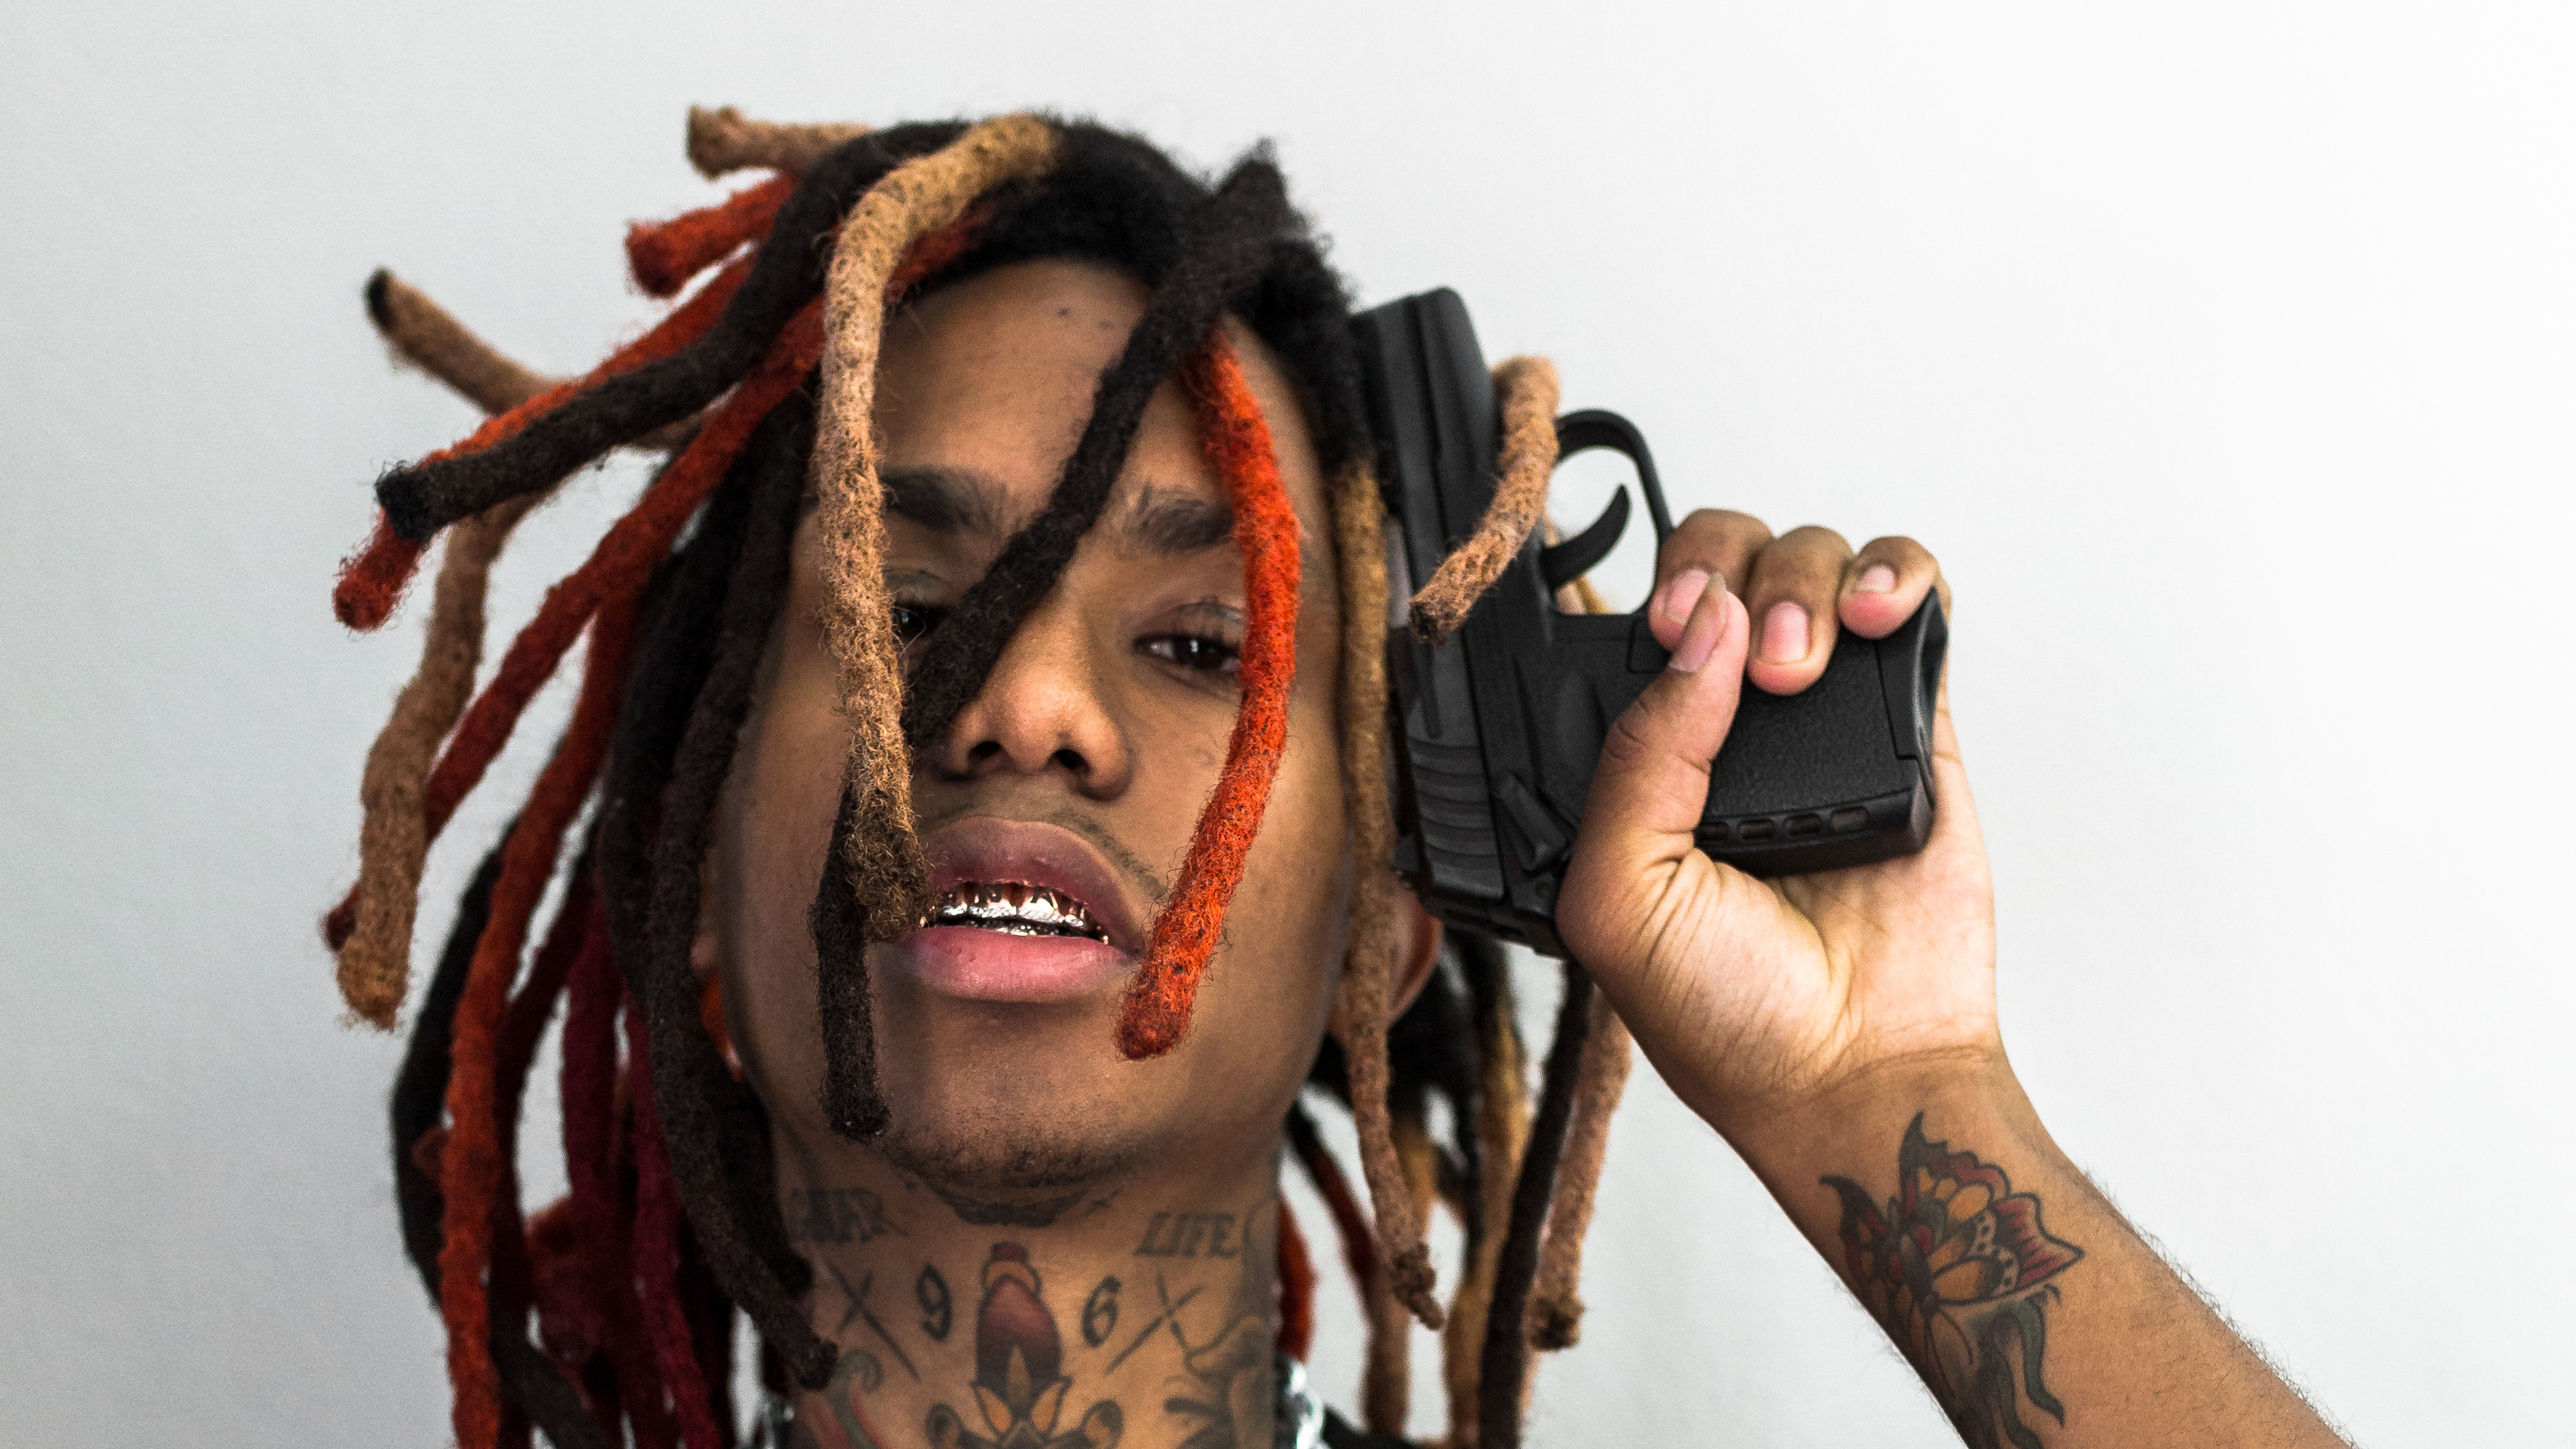 Wallpapers music lil gnar male celebrities on the desktop